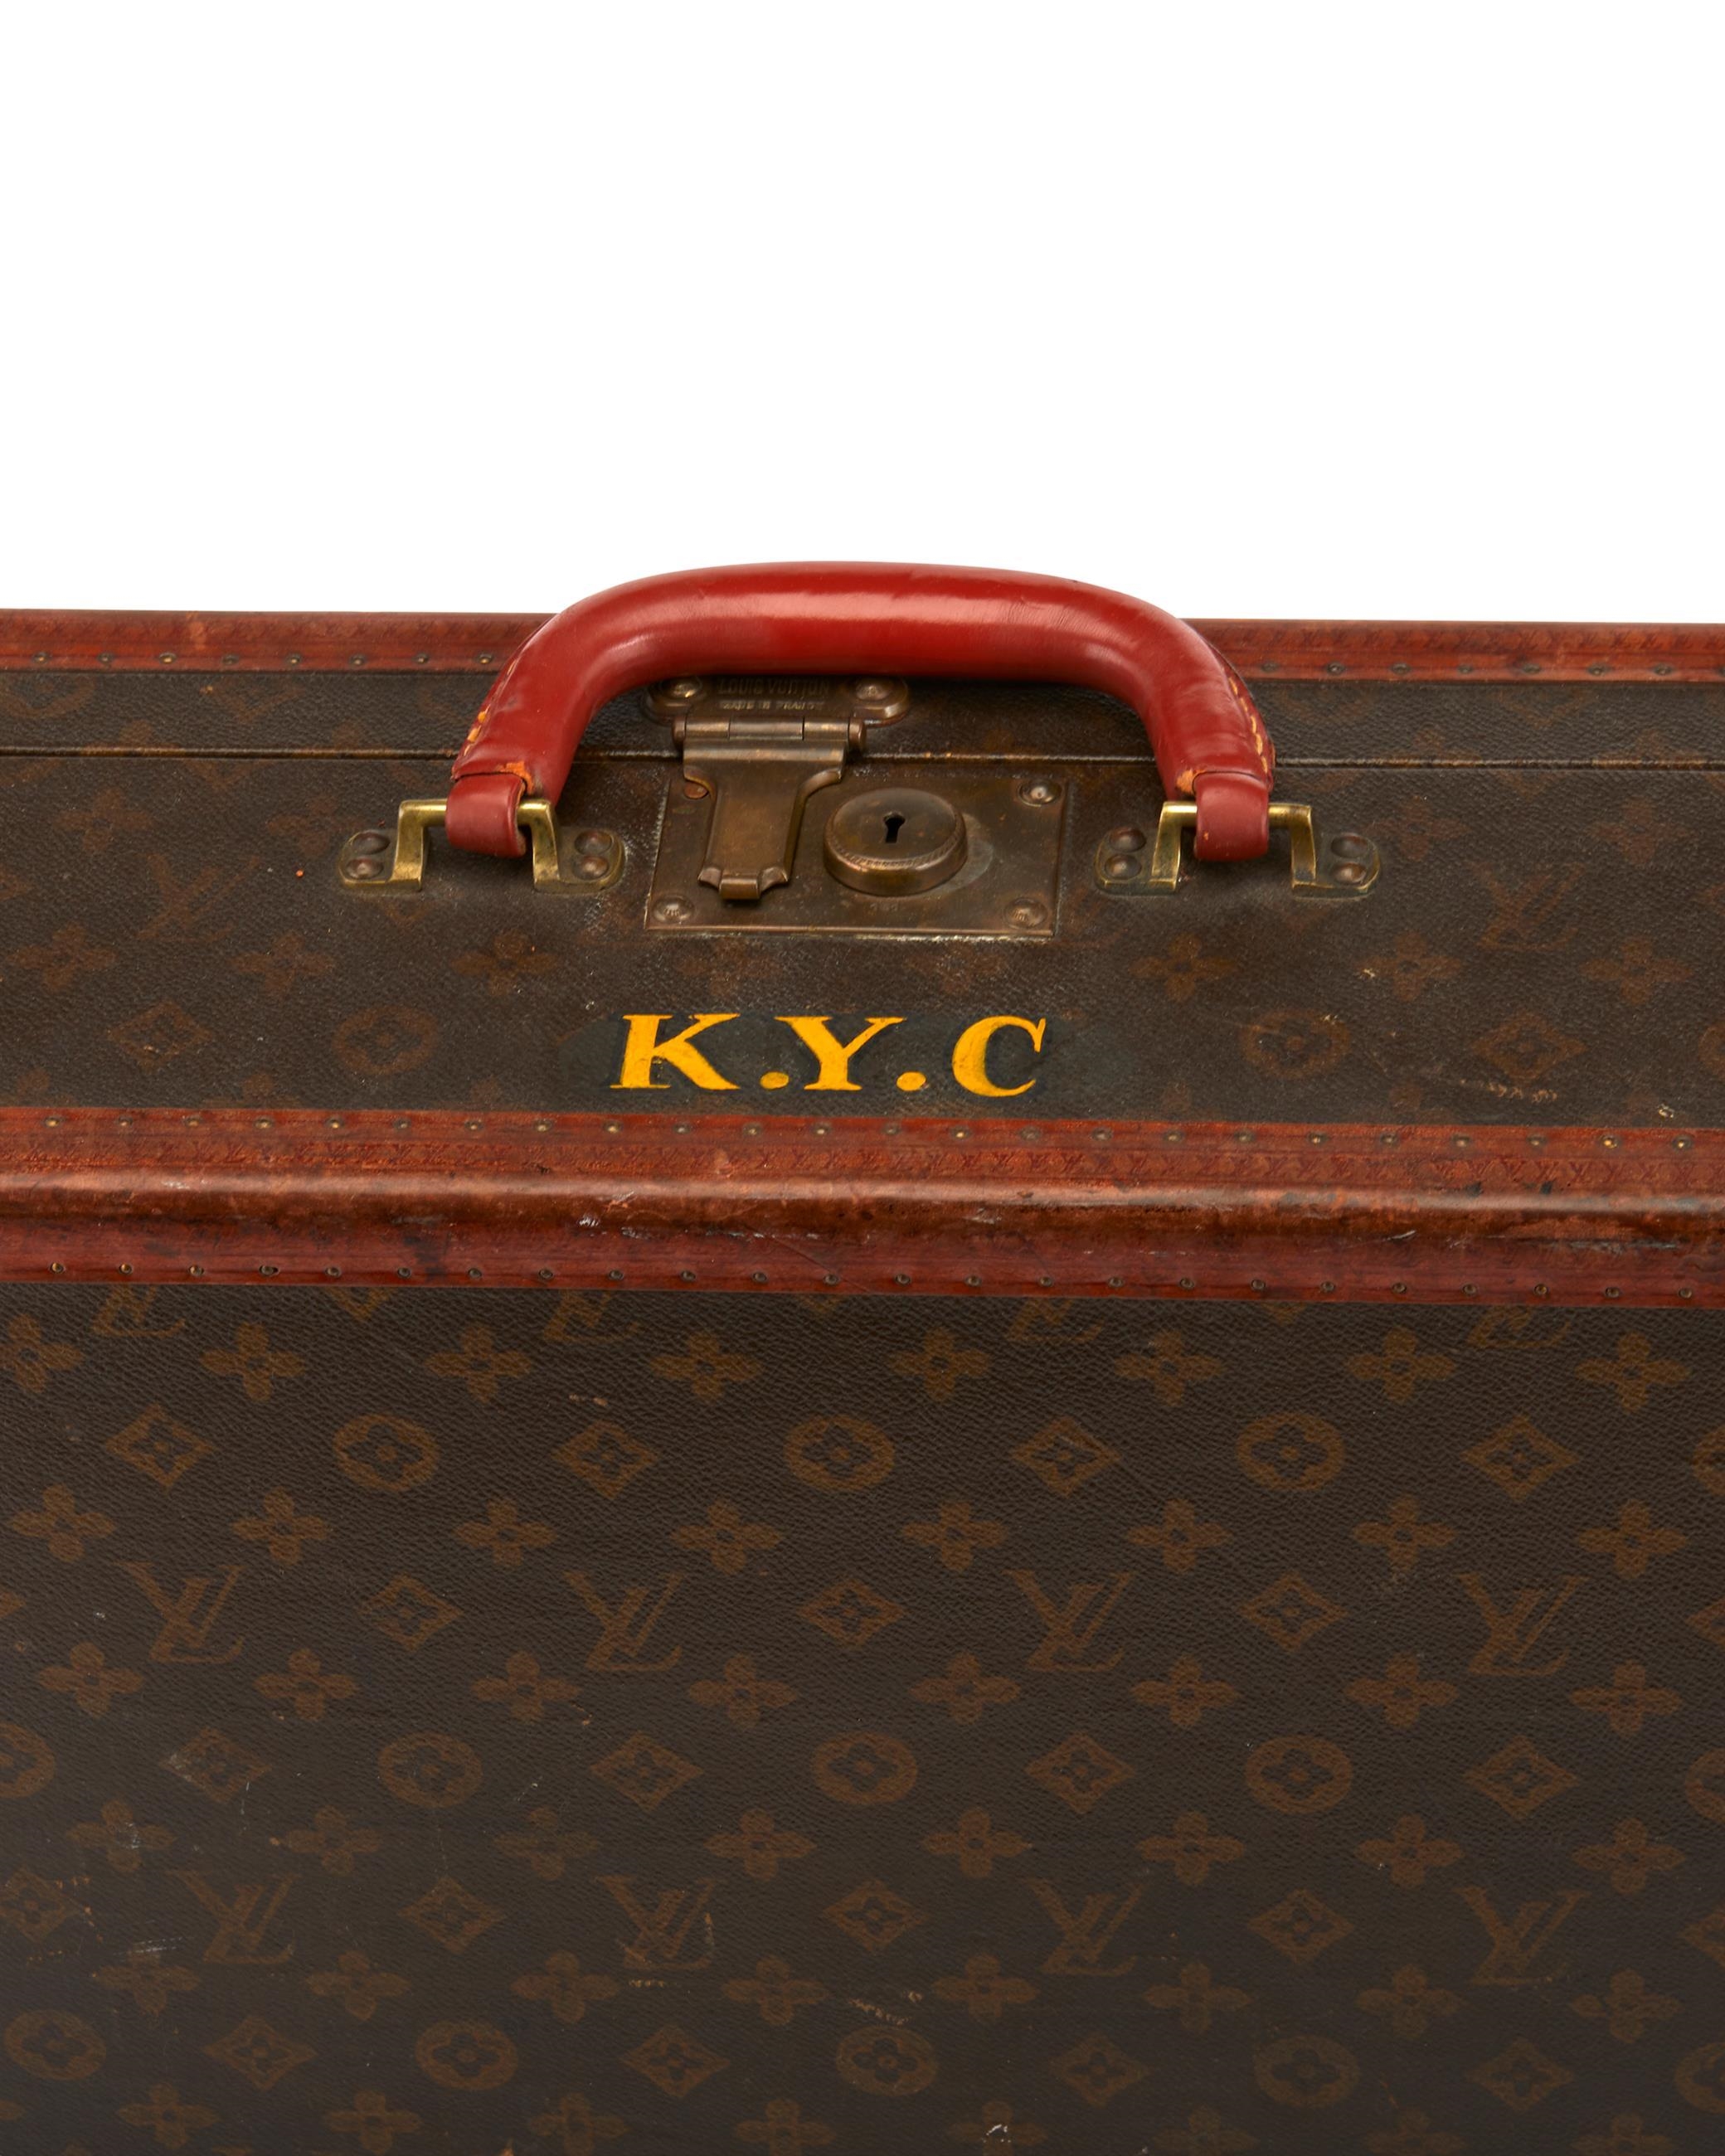 Sold at Auction: Vintage Louis Vuitton Small Hard Suitcase, with